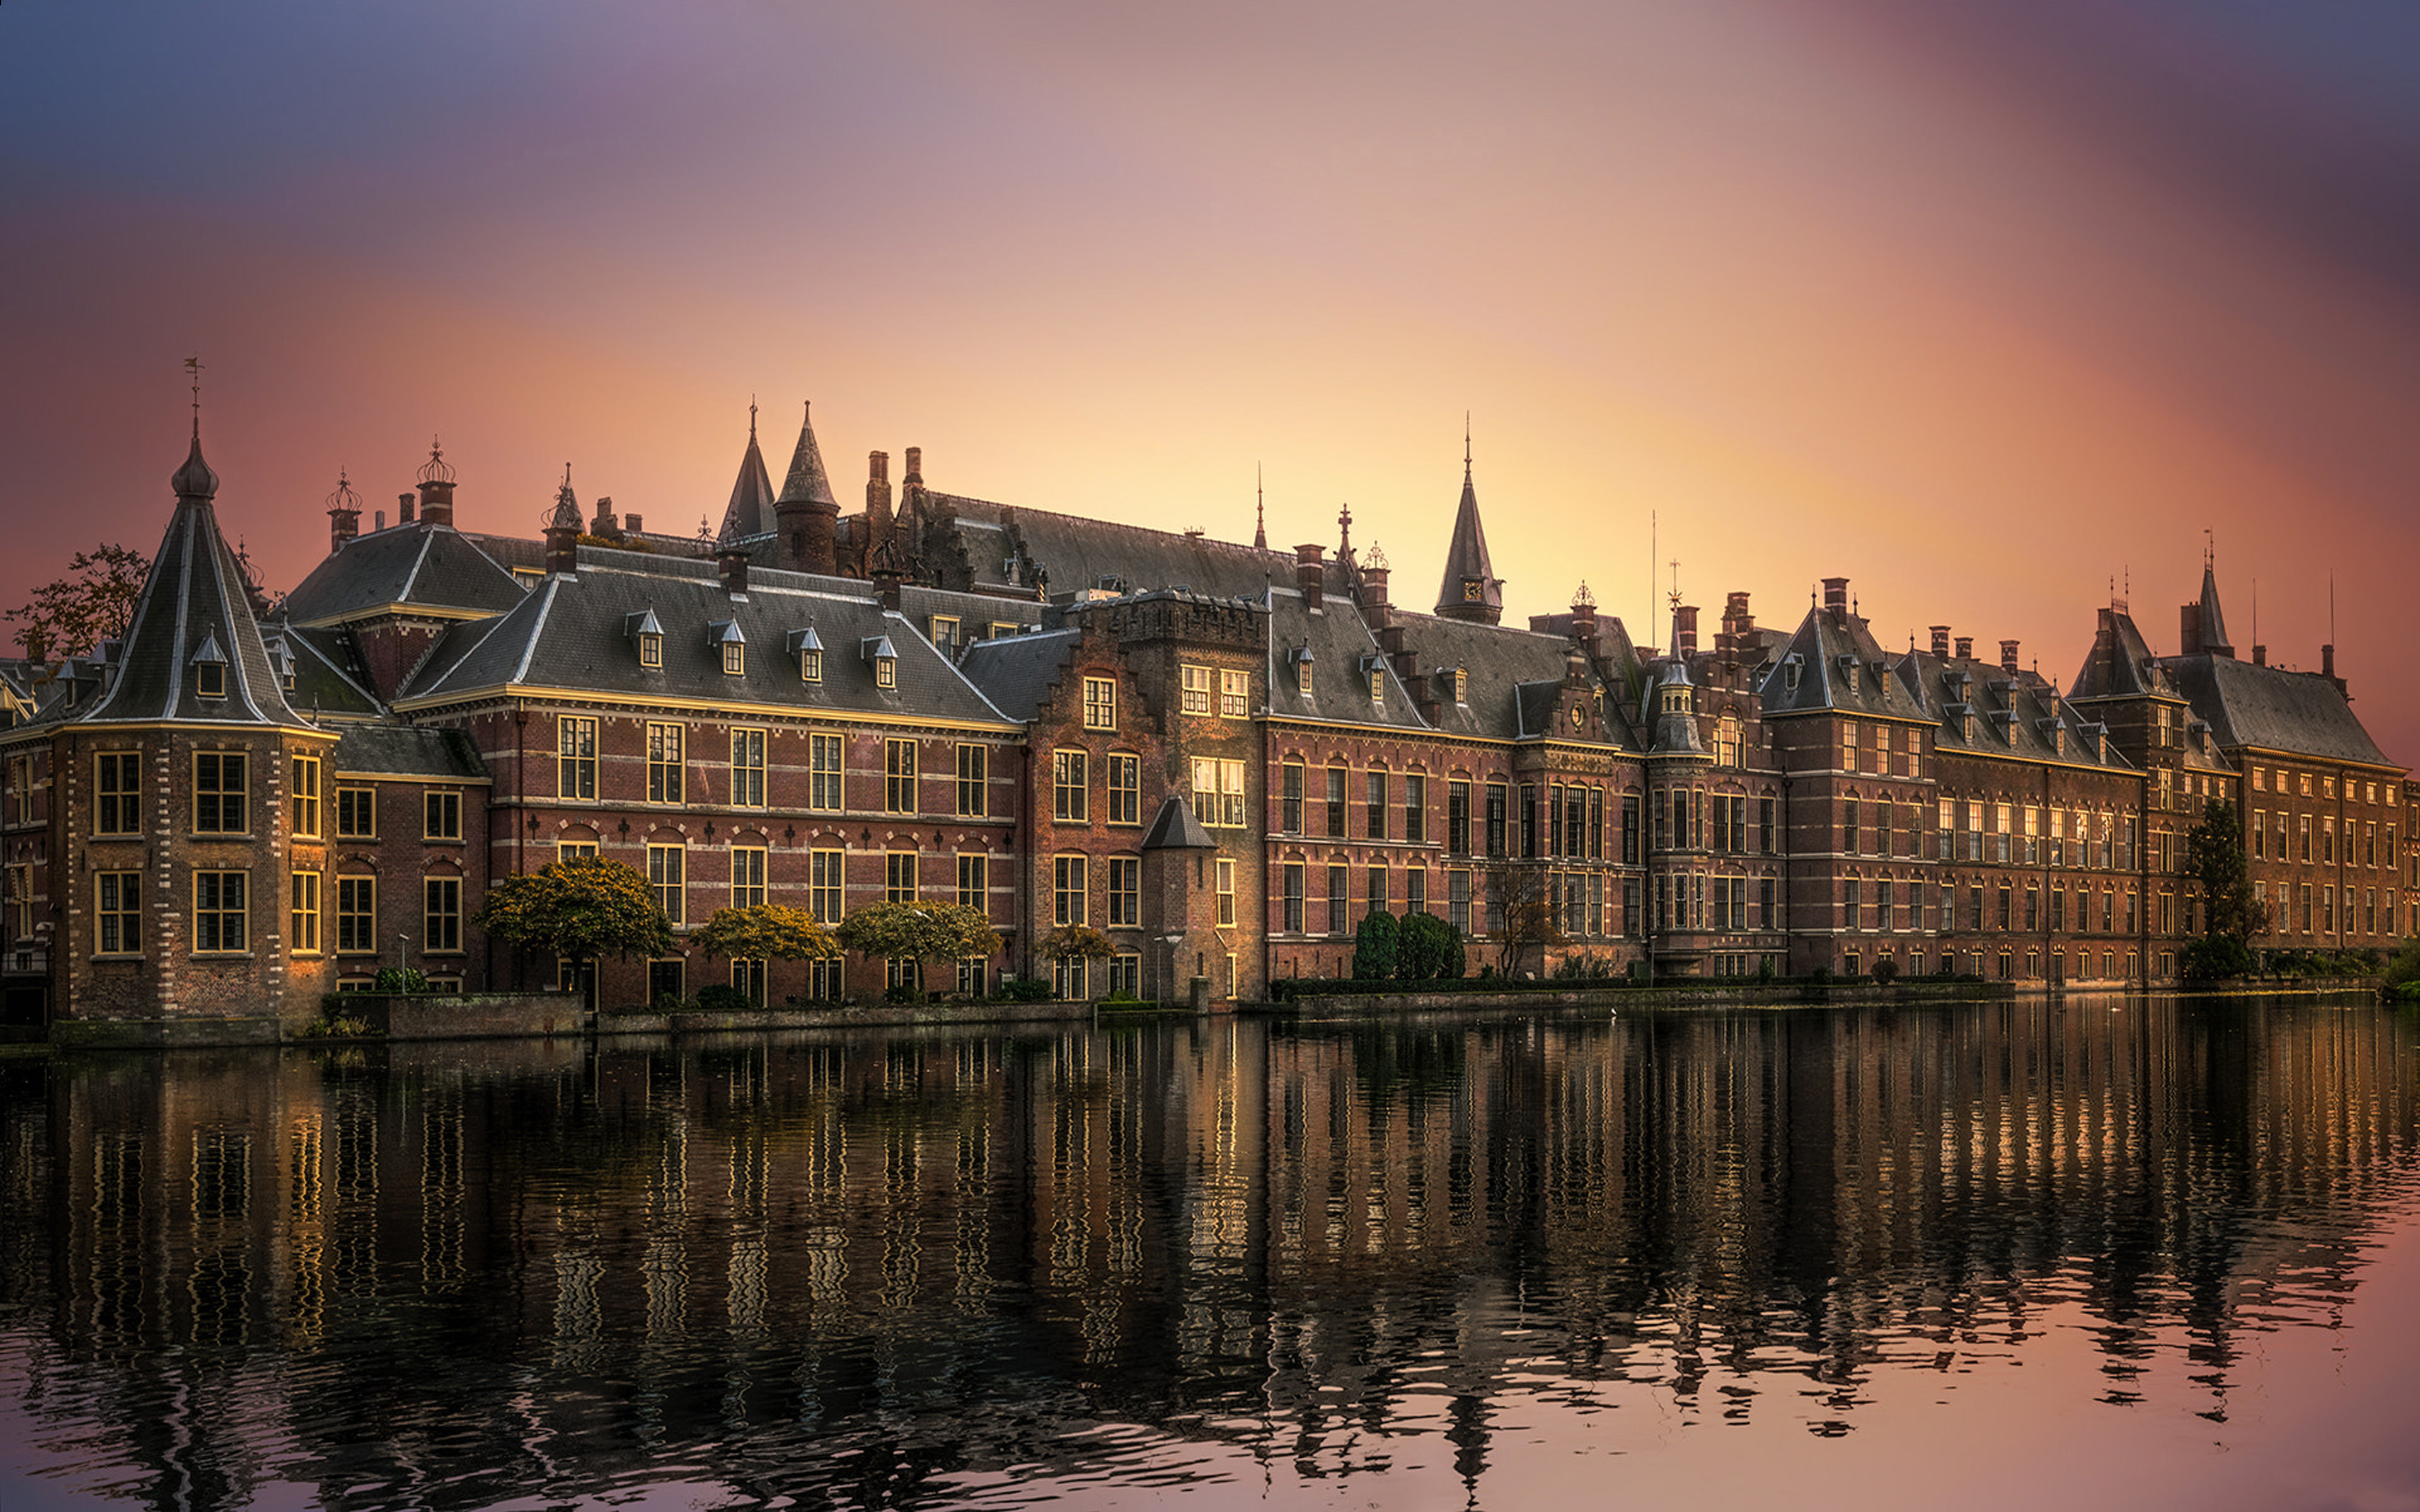 Sunset Binnenhof Is A Complex Of Buildings In The City Center Of The Hague Netherlands Ultra HD Wallpaper For Desktop Mobile Phones And Laptops 3840x2400, Wallpaper13.com